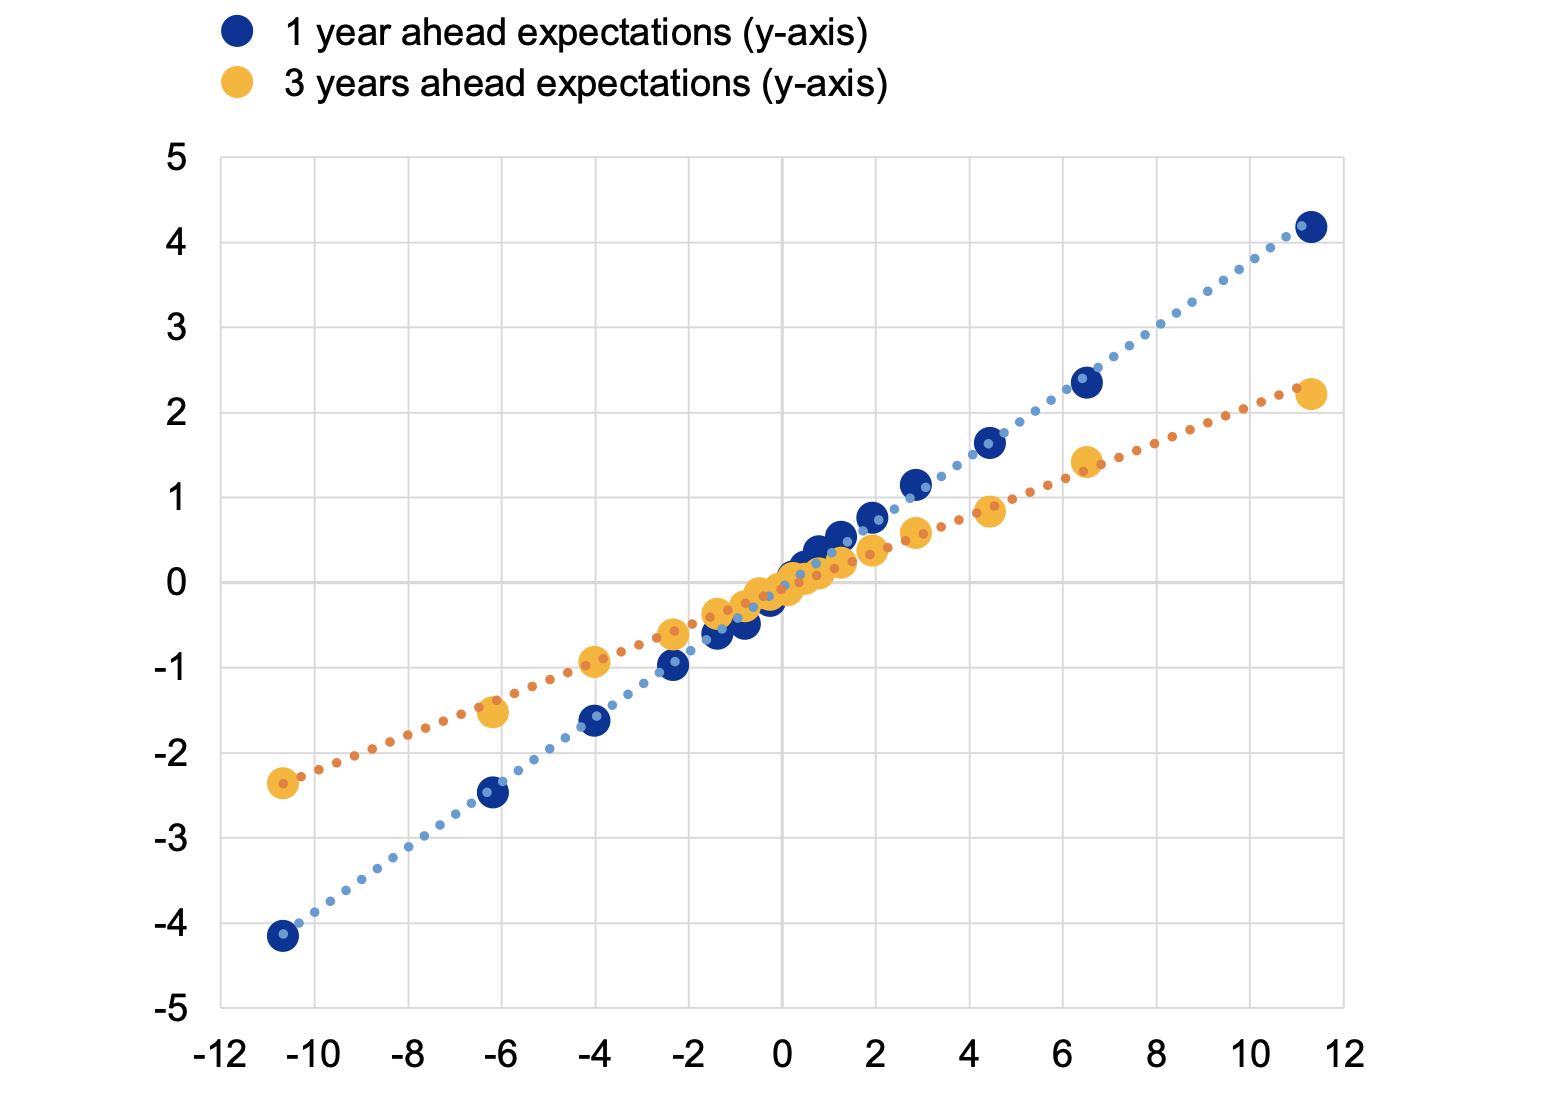 Figure 1b Sensitivity of inflation expectations to current inflation news